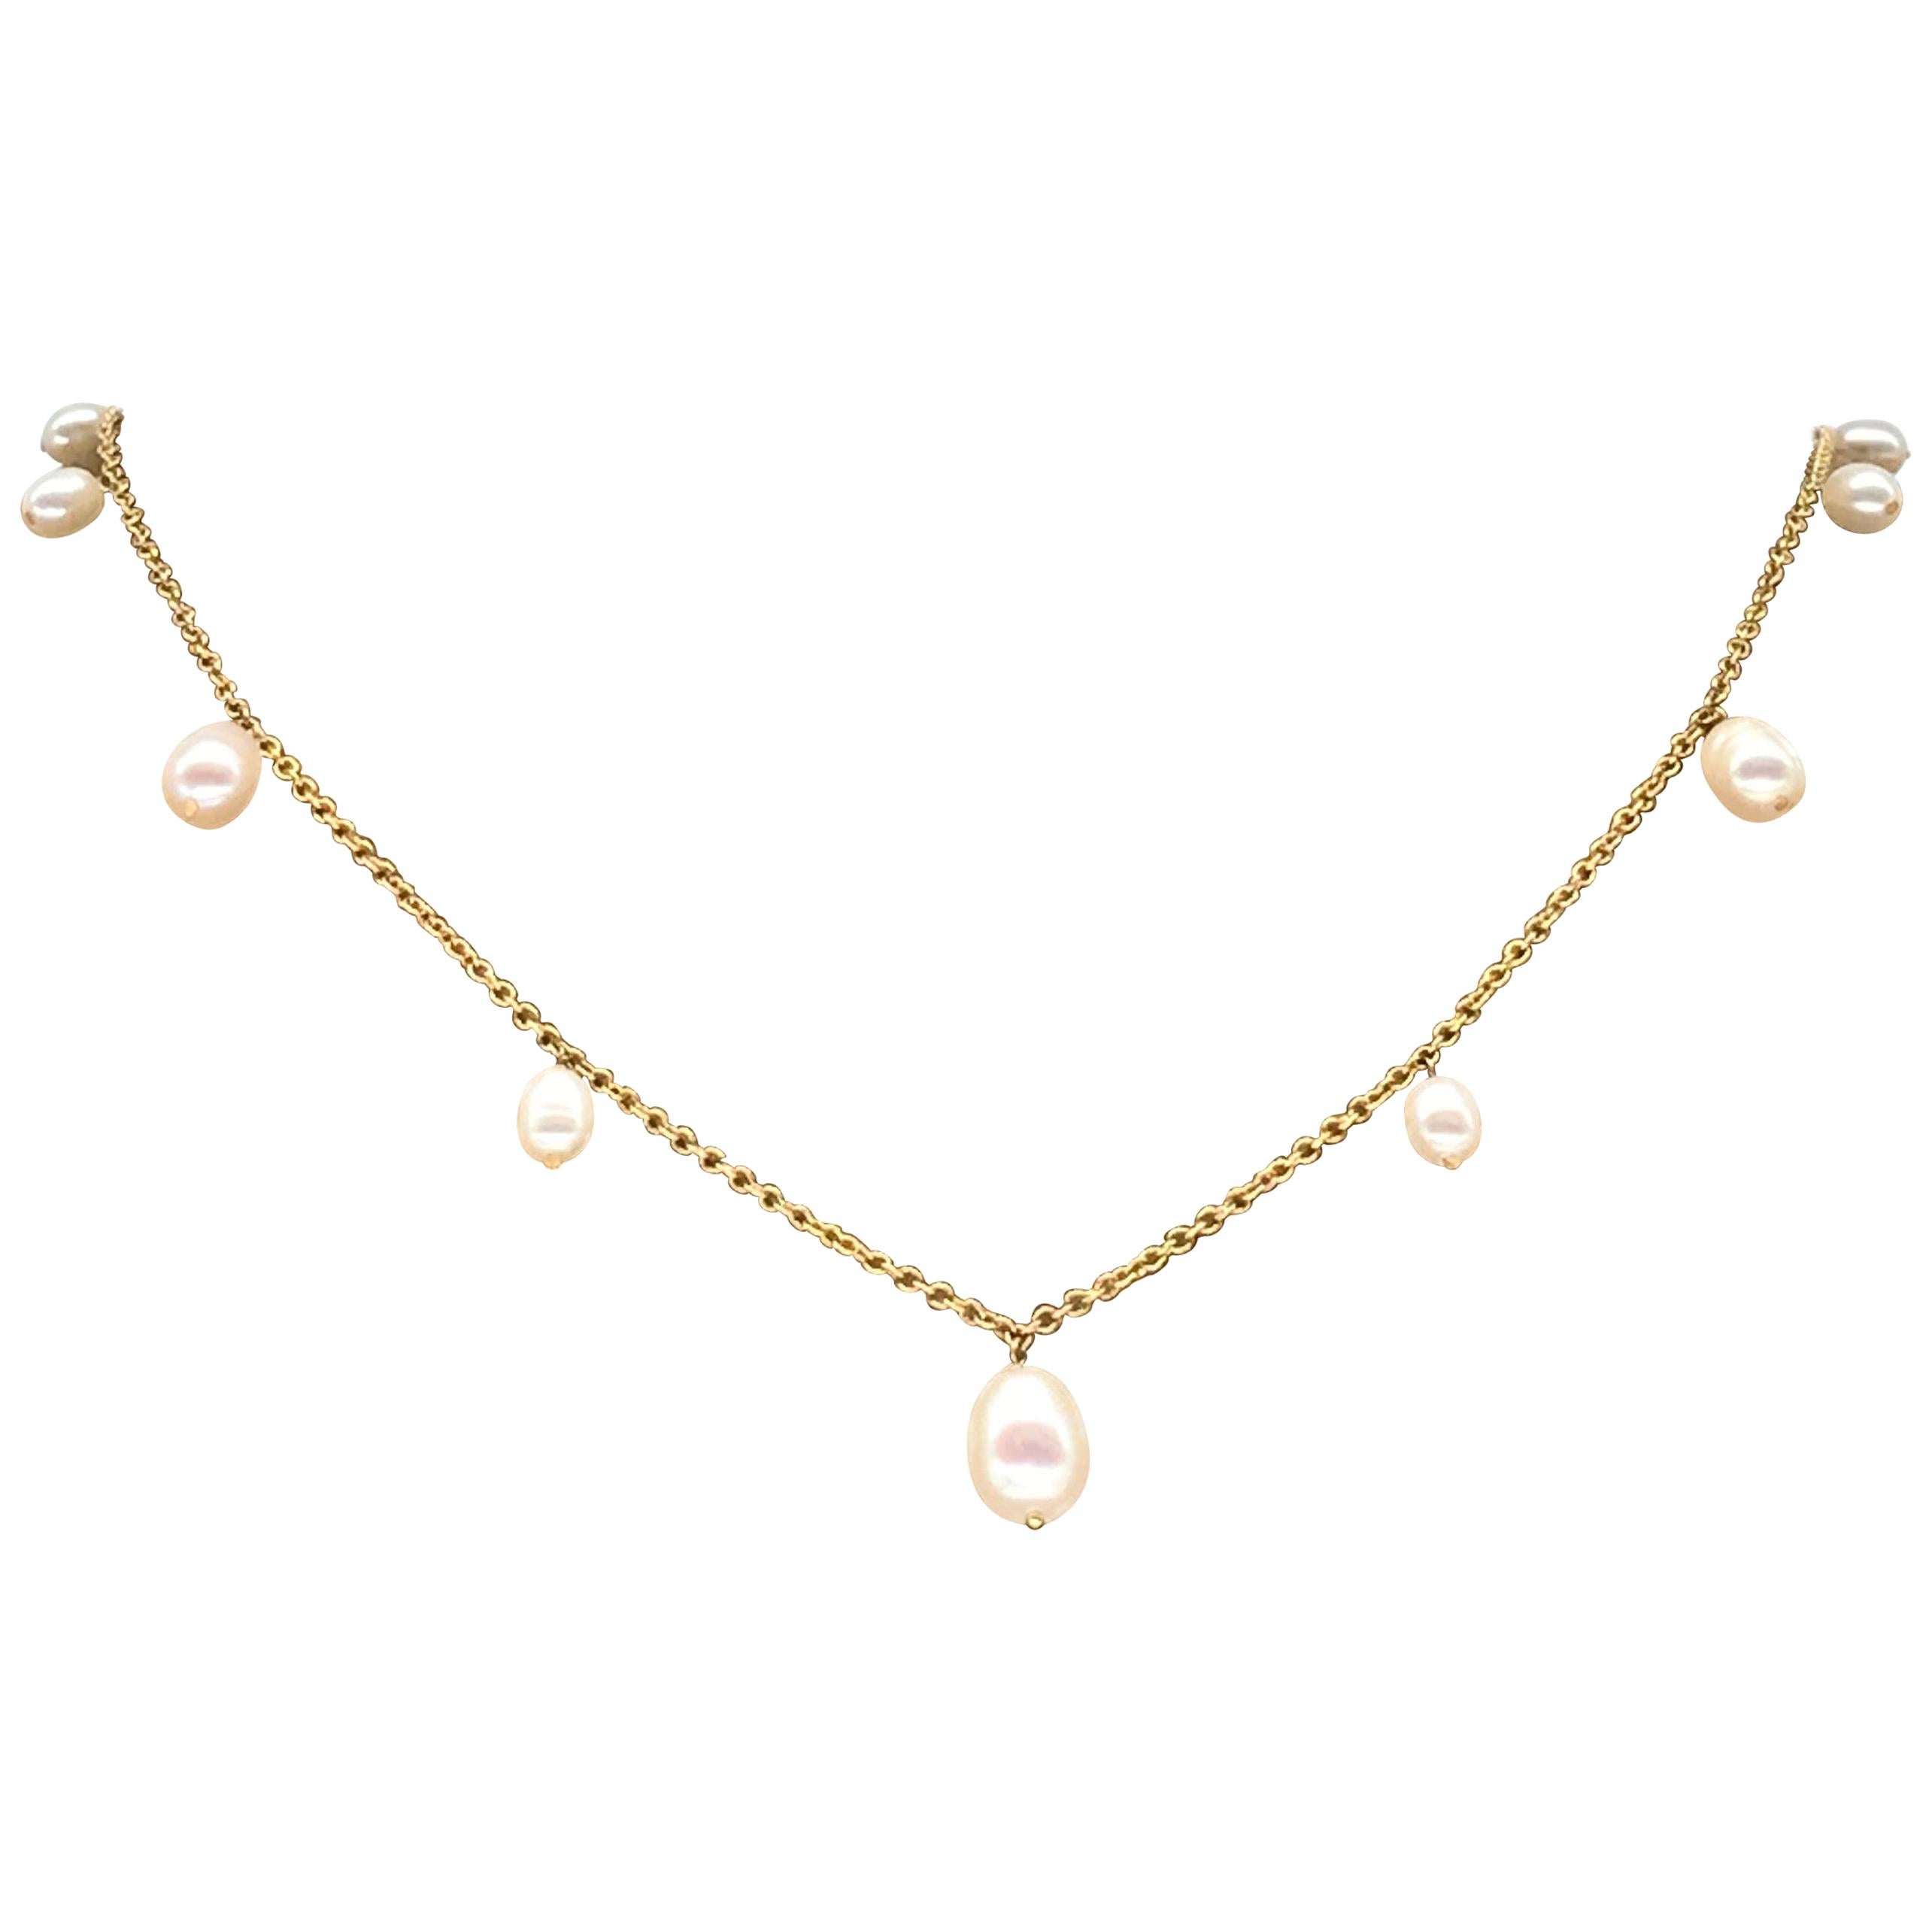 Yellow Gold 18k Jaserons Chain
Weight of Gold :  4 grams
11 Natural FreshWater Pearls 
Length 52.5 cm / 20,47 inch